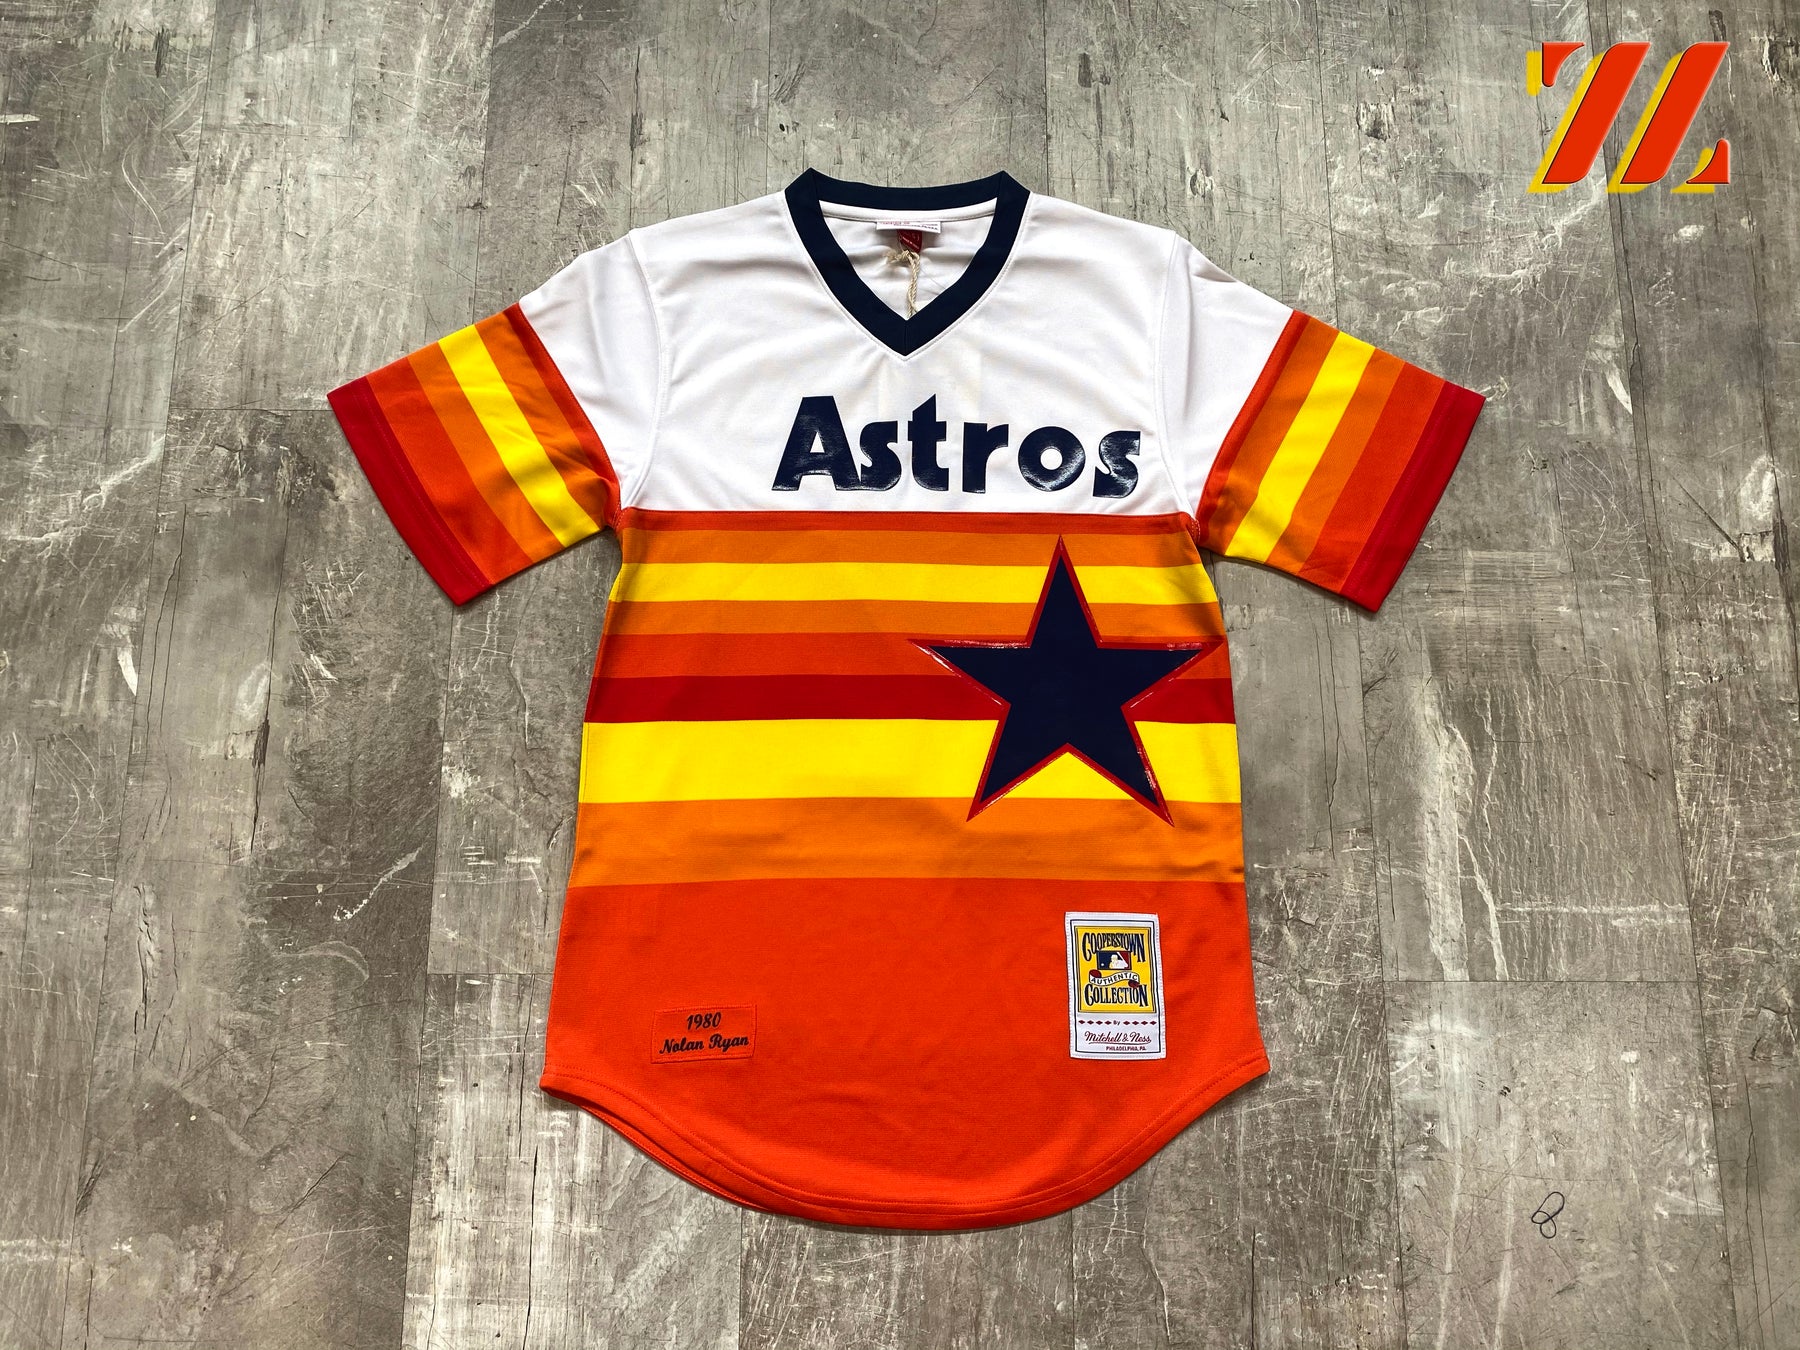 Astros Authentics: 1992 Road Jersey: #22 Simms